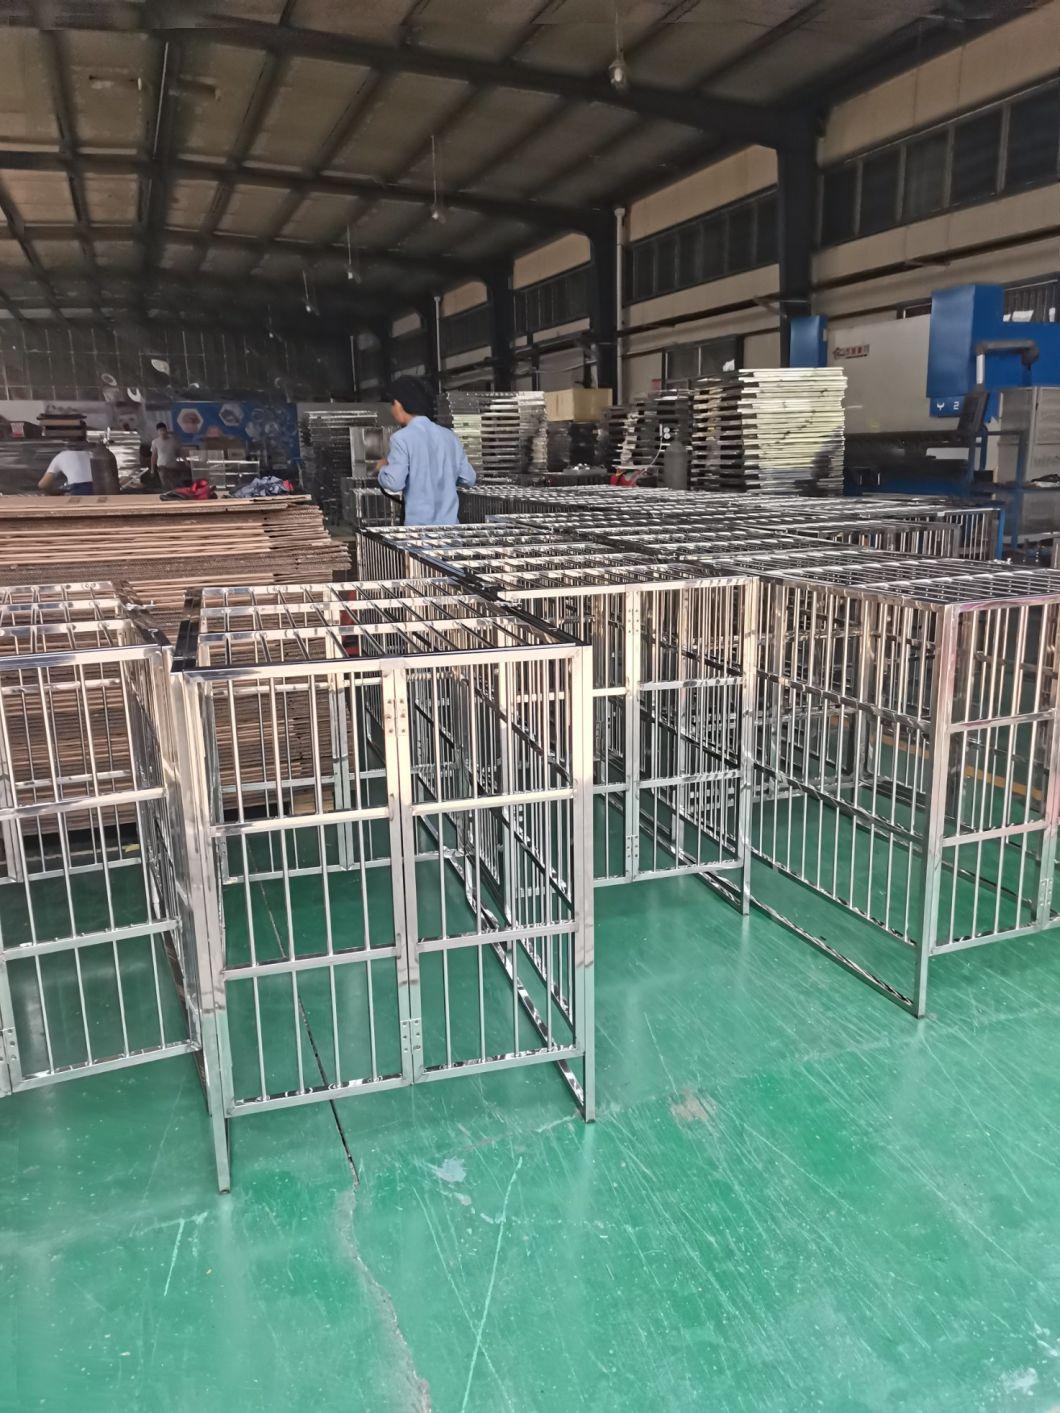 Used Veterinary Cages Animal Cages Stainless Steel High-Grade Cat Veterinary Cage